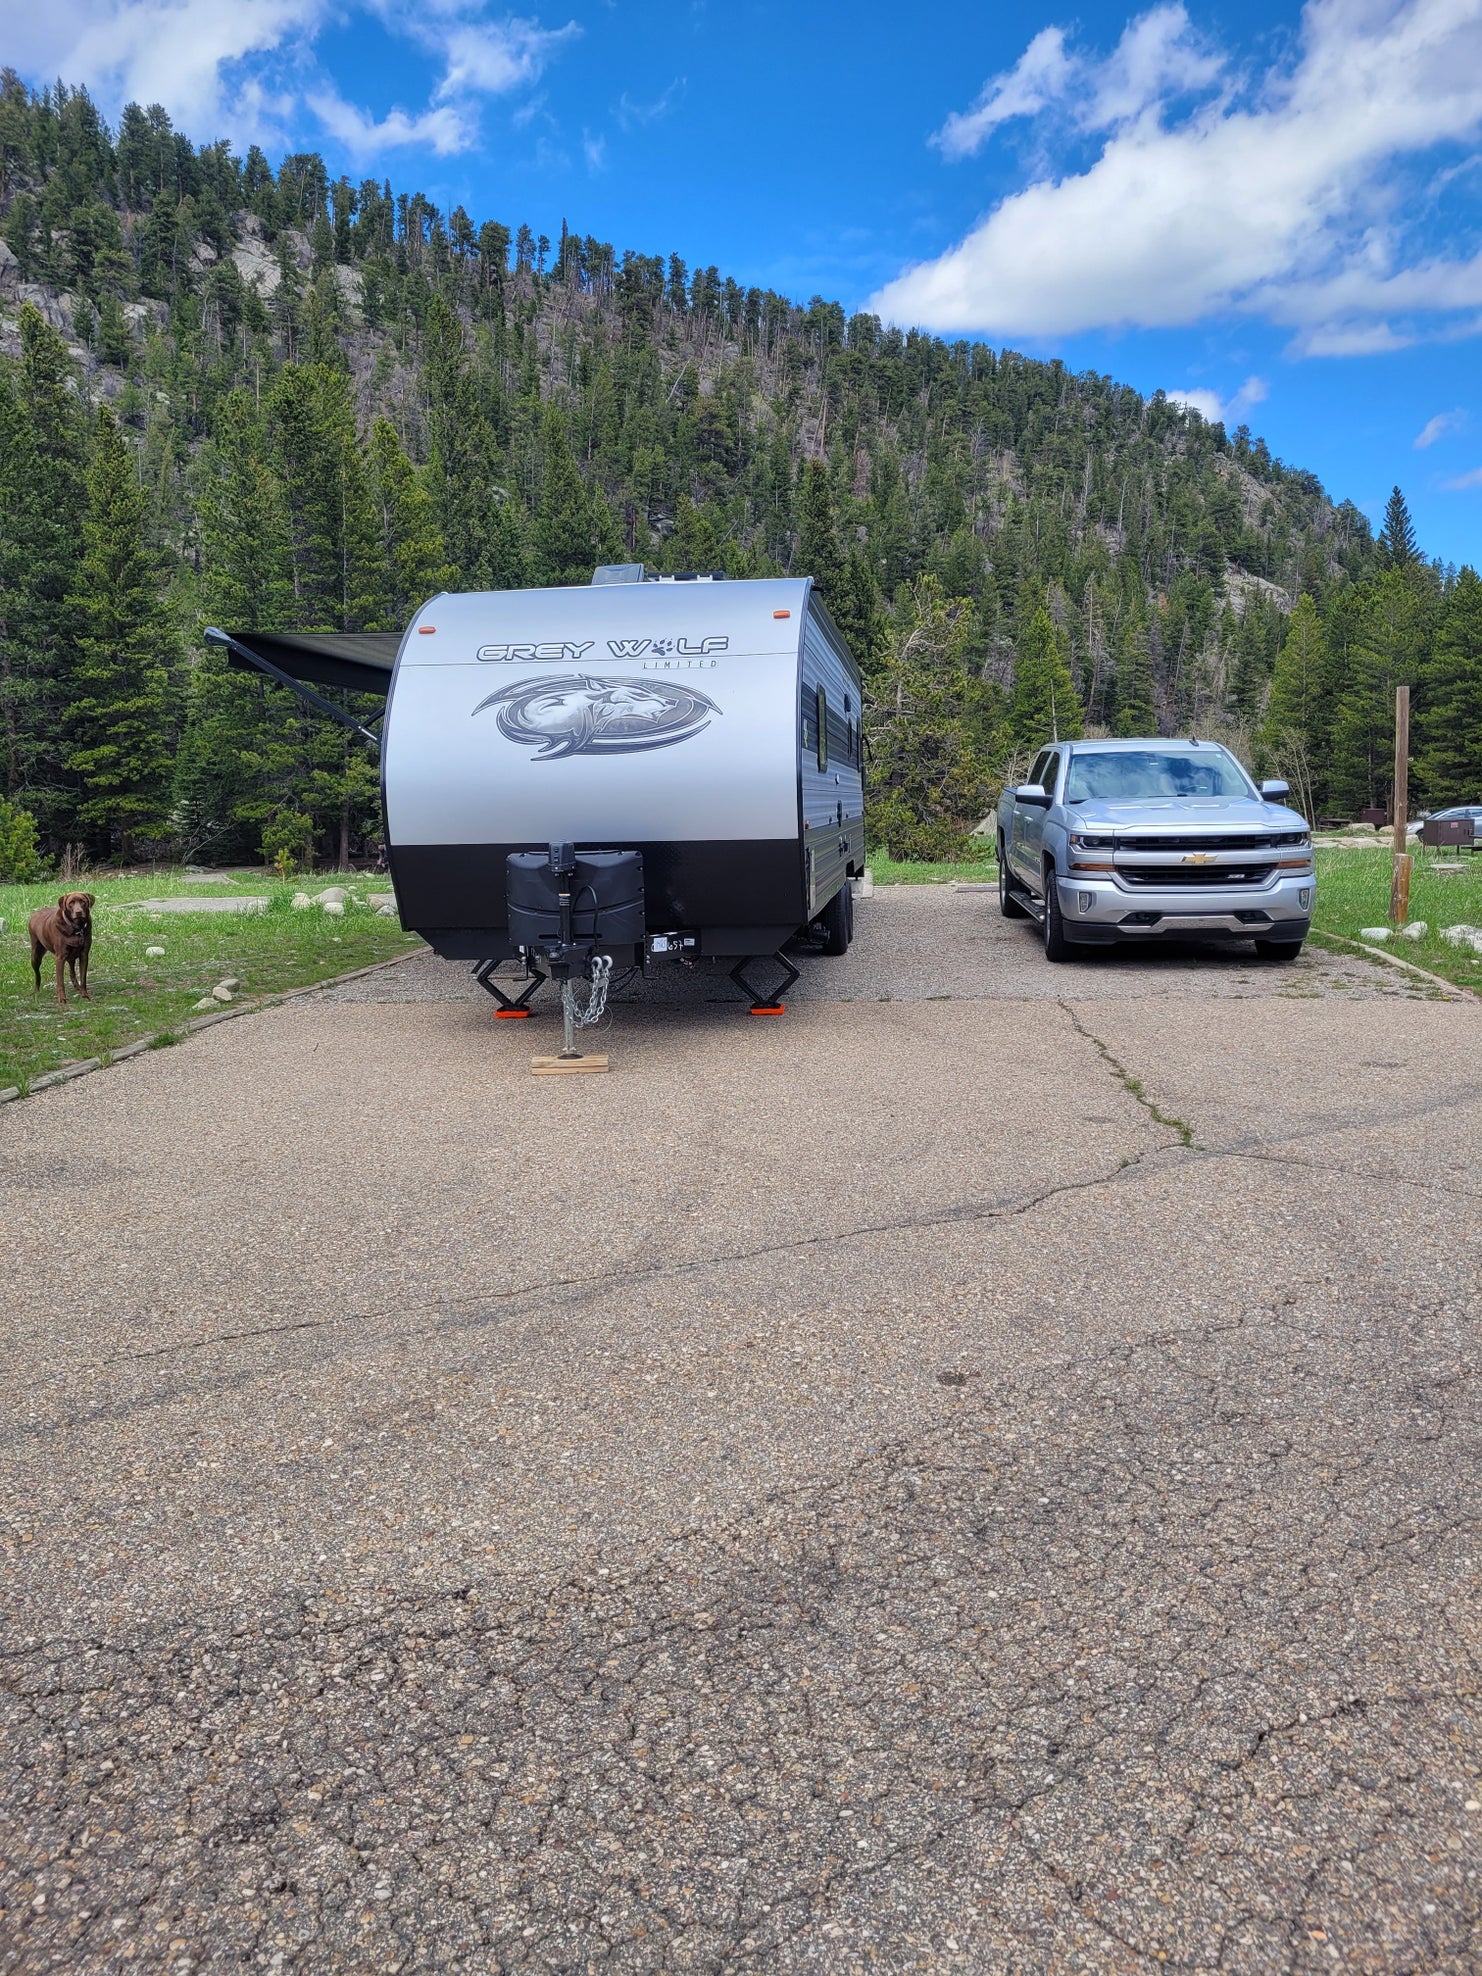 Roosevelt National Forest Camp Dick Campground | The Dyrt